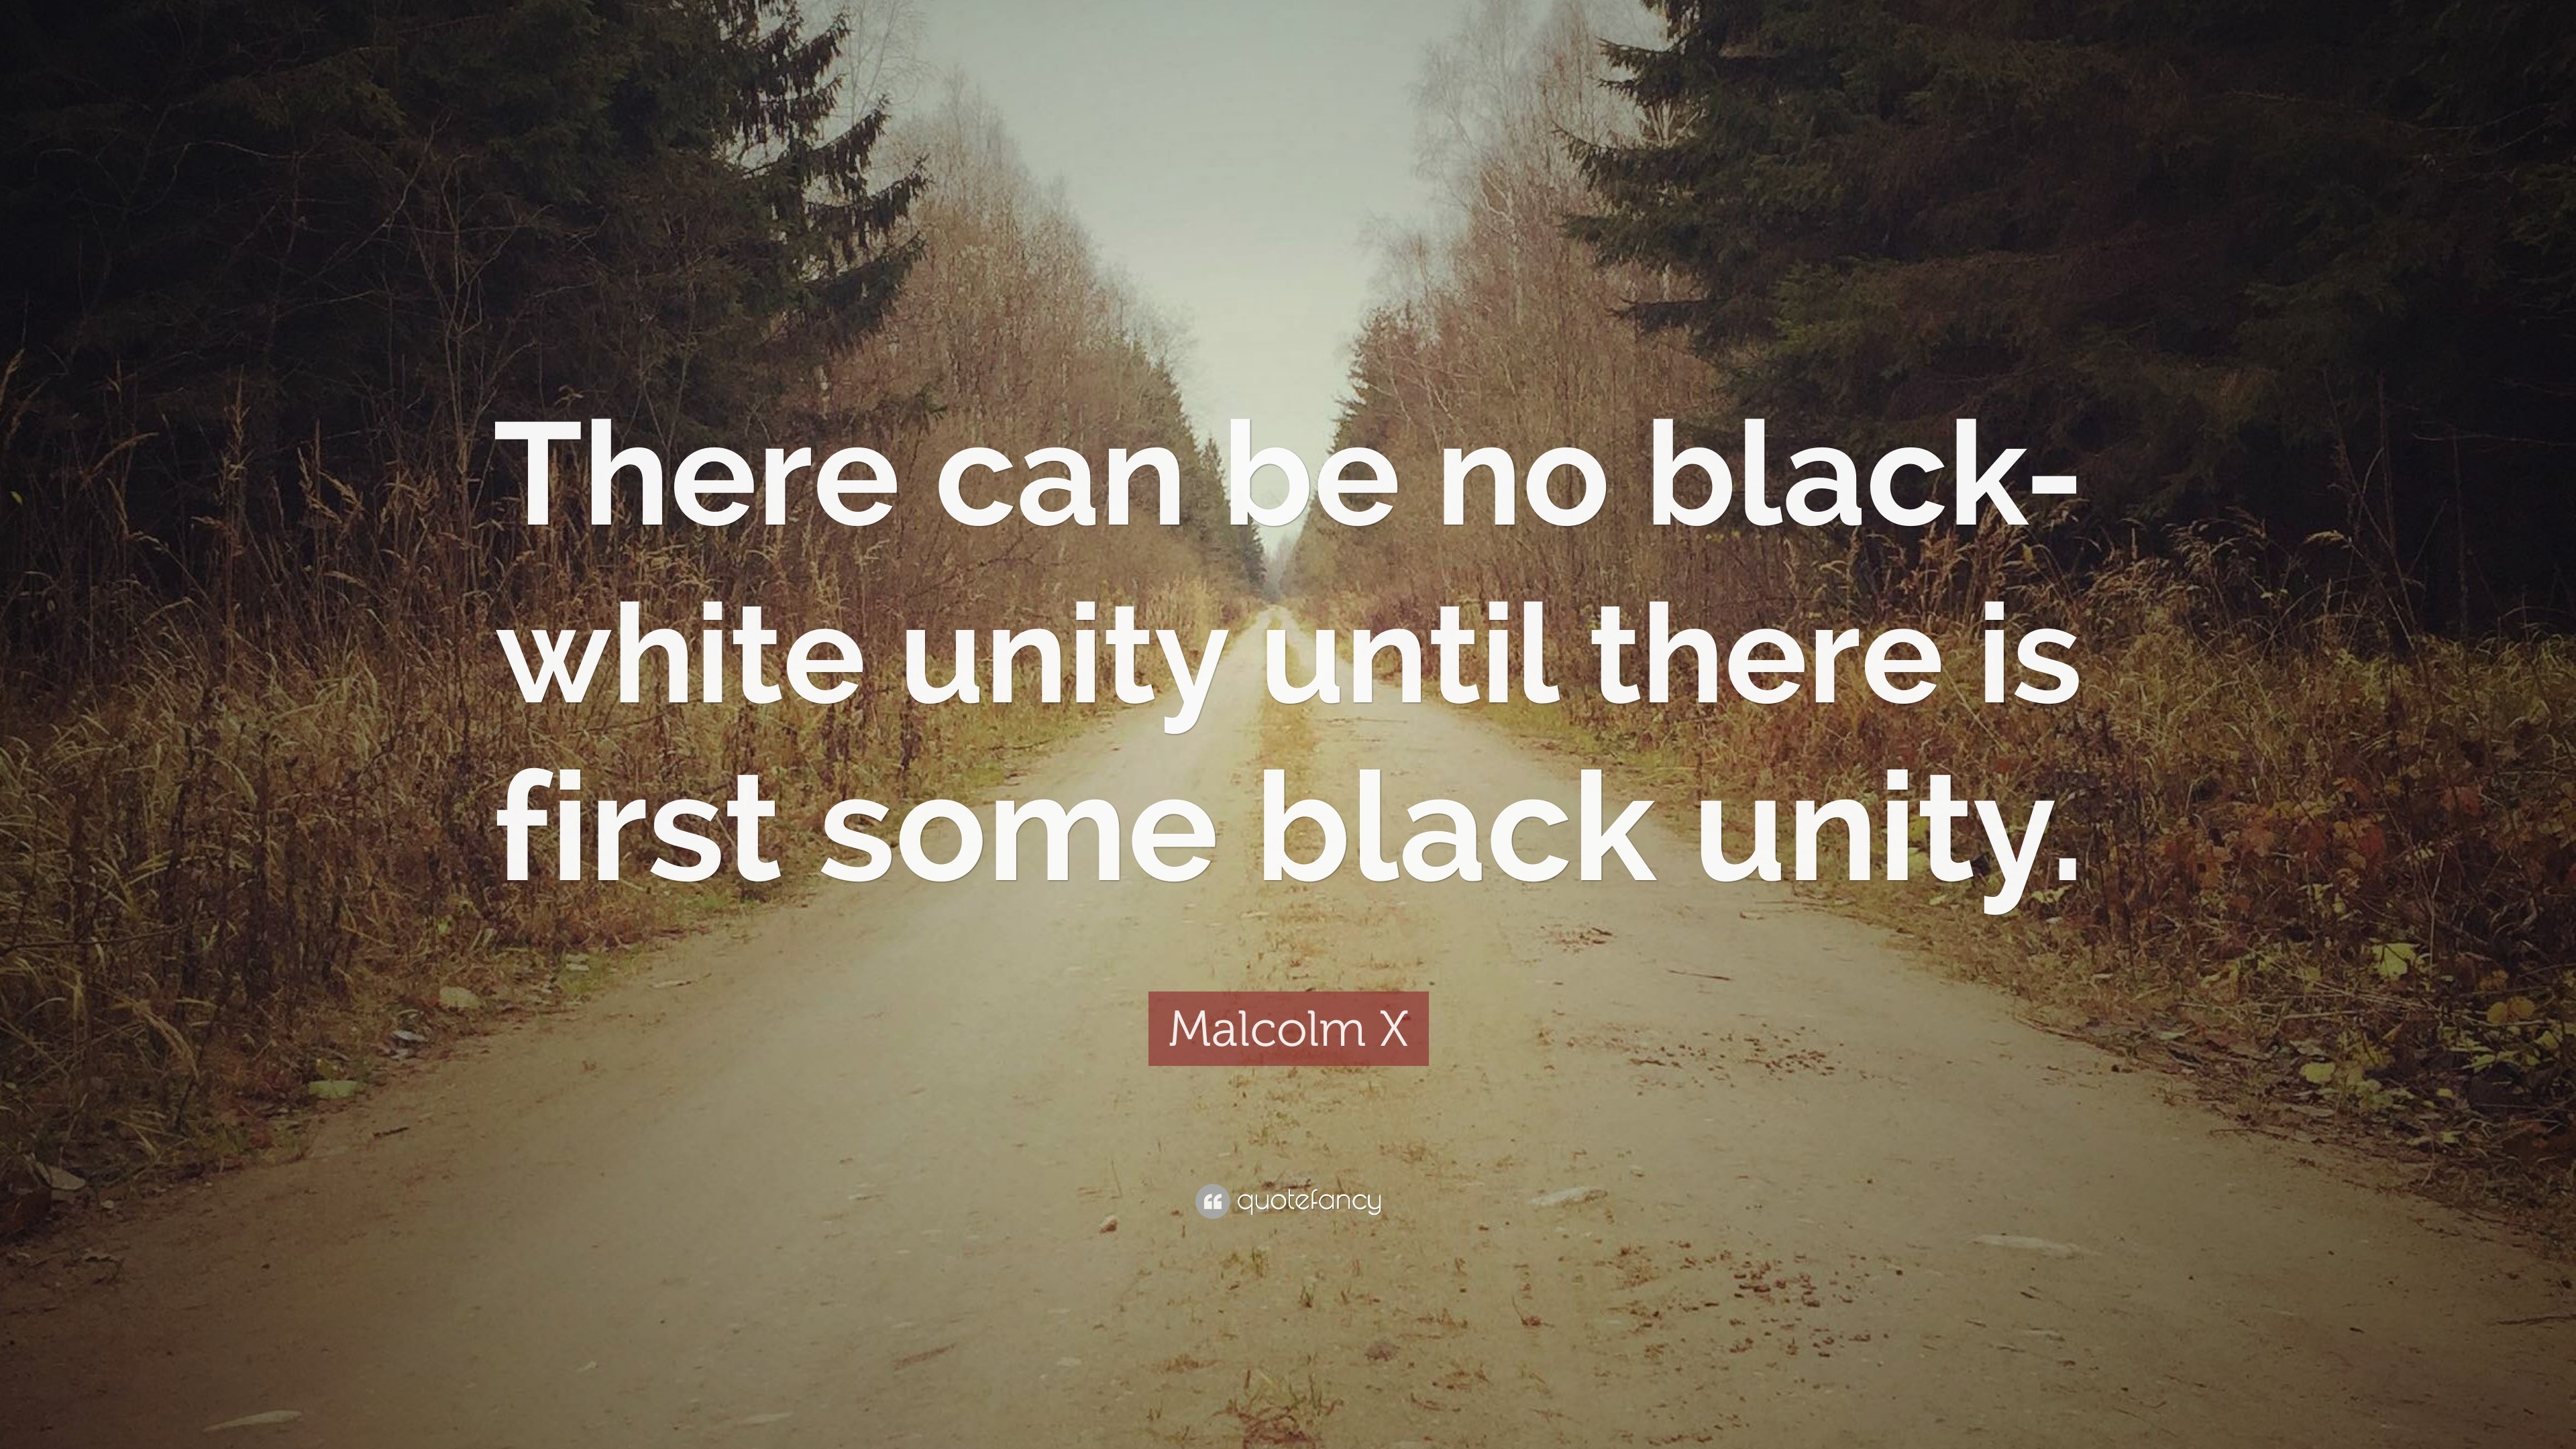 Malcolm X Quote: “There can be no black-white unity until there is